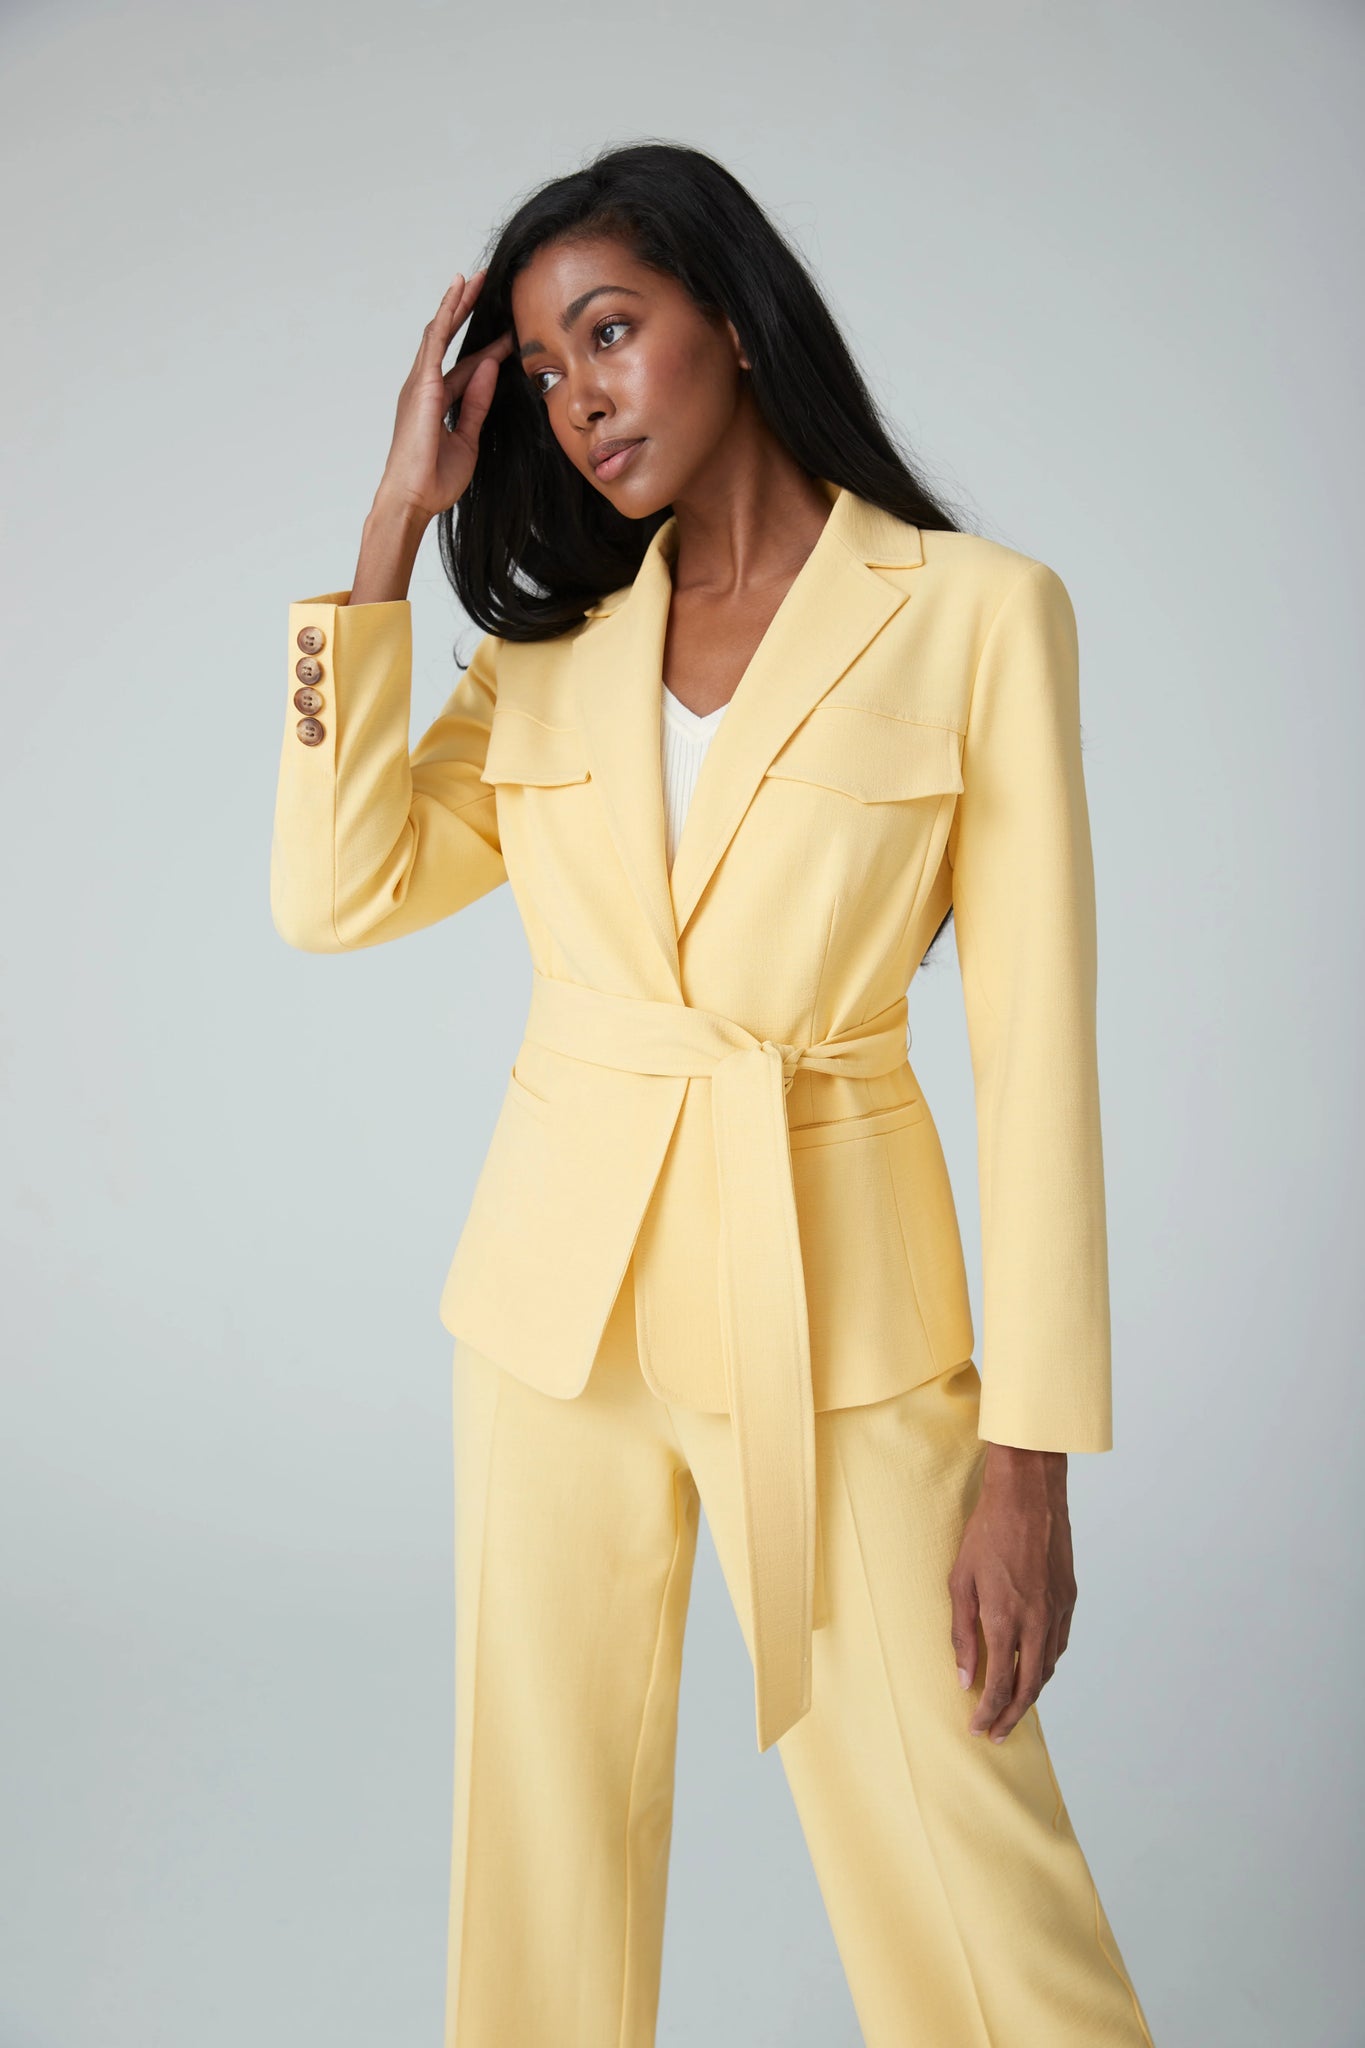 Women's Suits | Mustard Gold Yellow Suit | Edgy Professional Wear – Layo G.